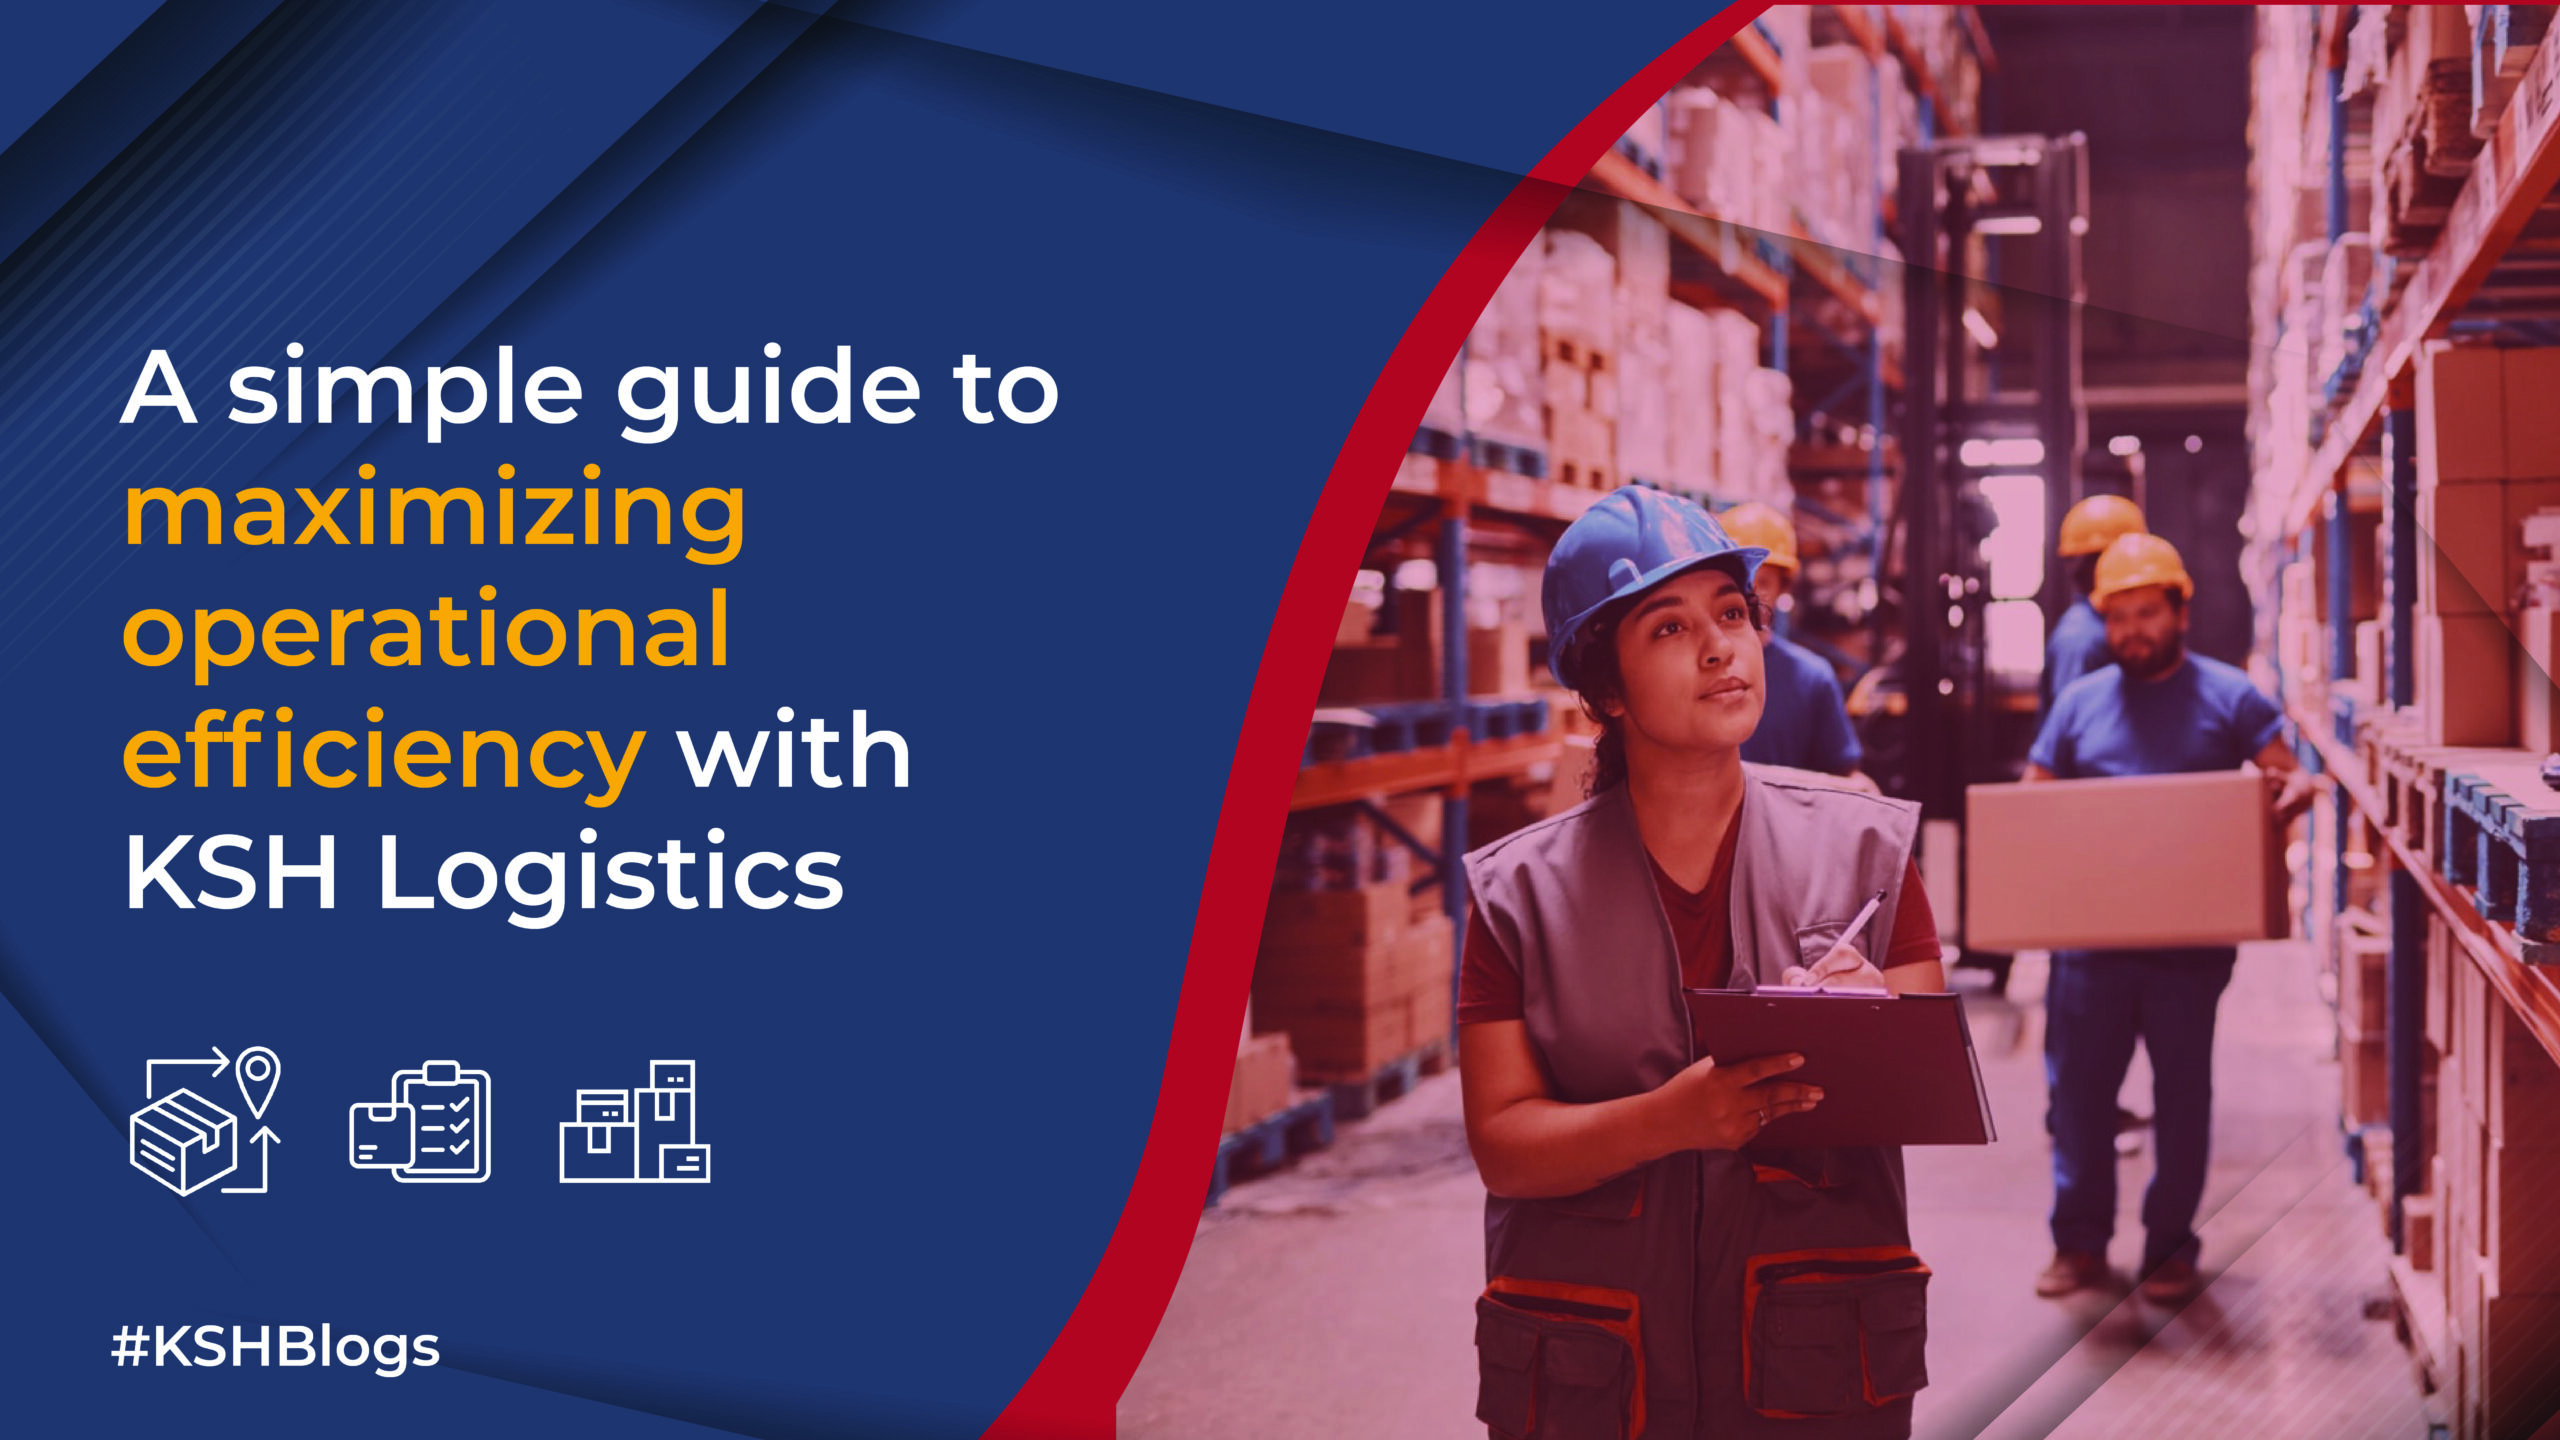 A simple guide to maximizing operational efficiency with KSH Logistics